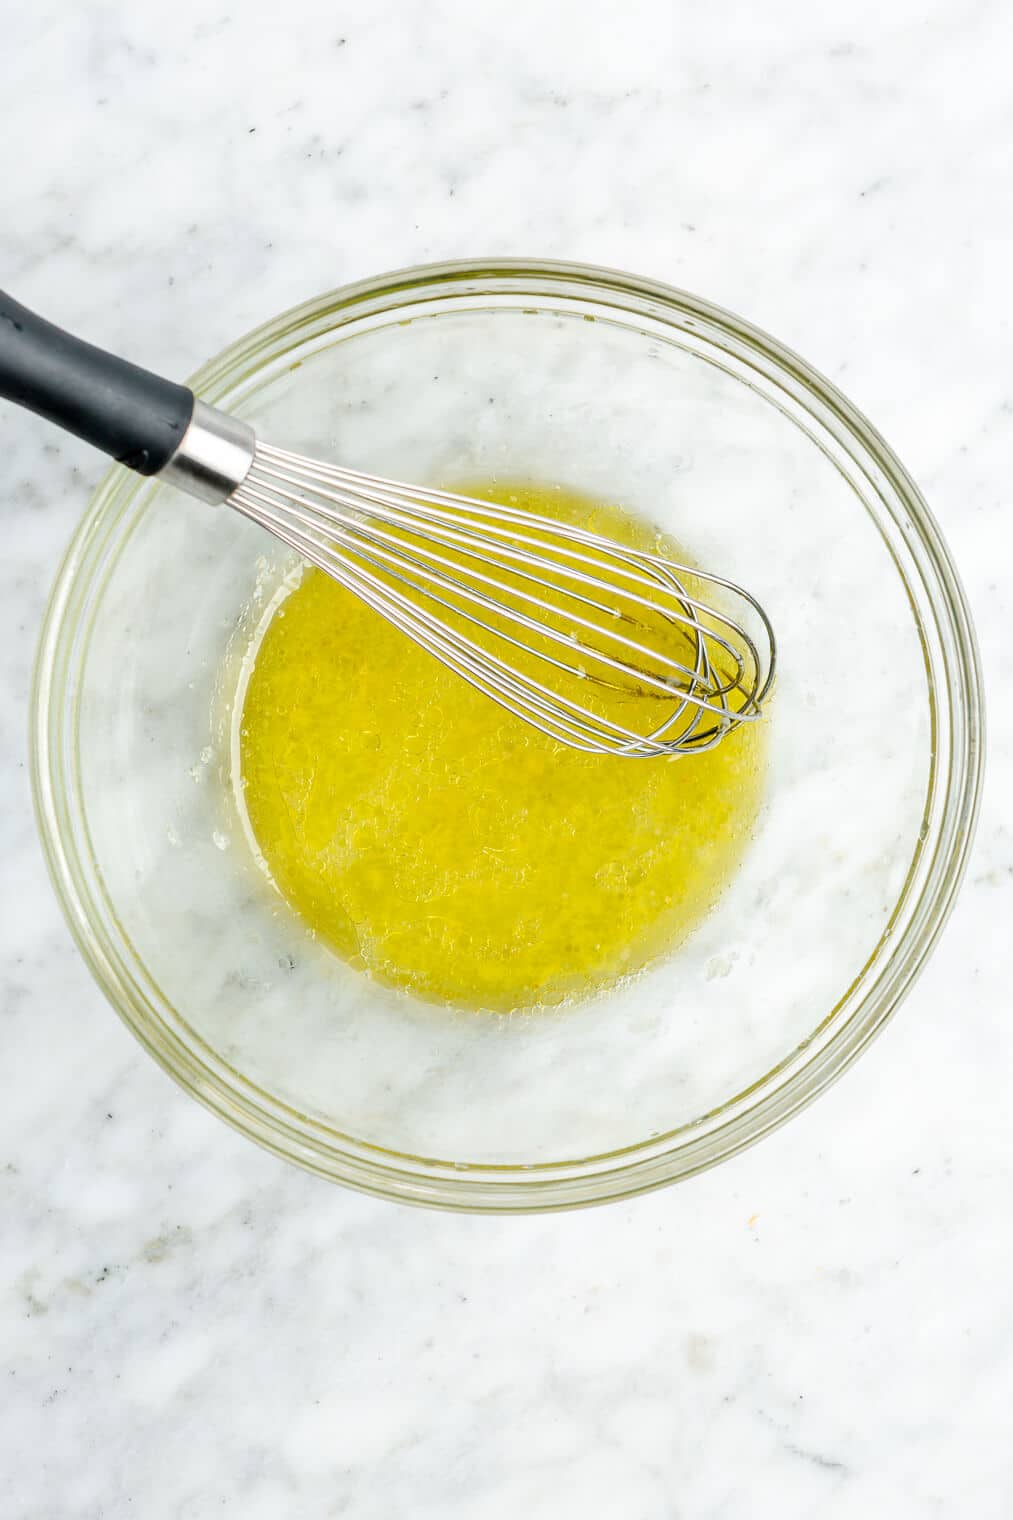 Whisked olive oil, lemon juice, and garlic in a glass bowl on a grey and white marble surface.